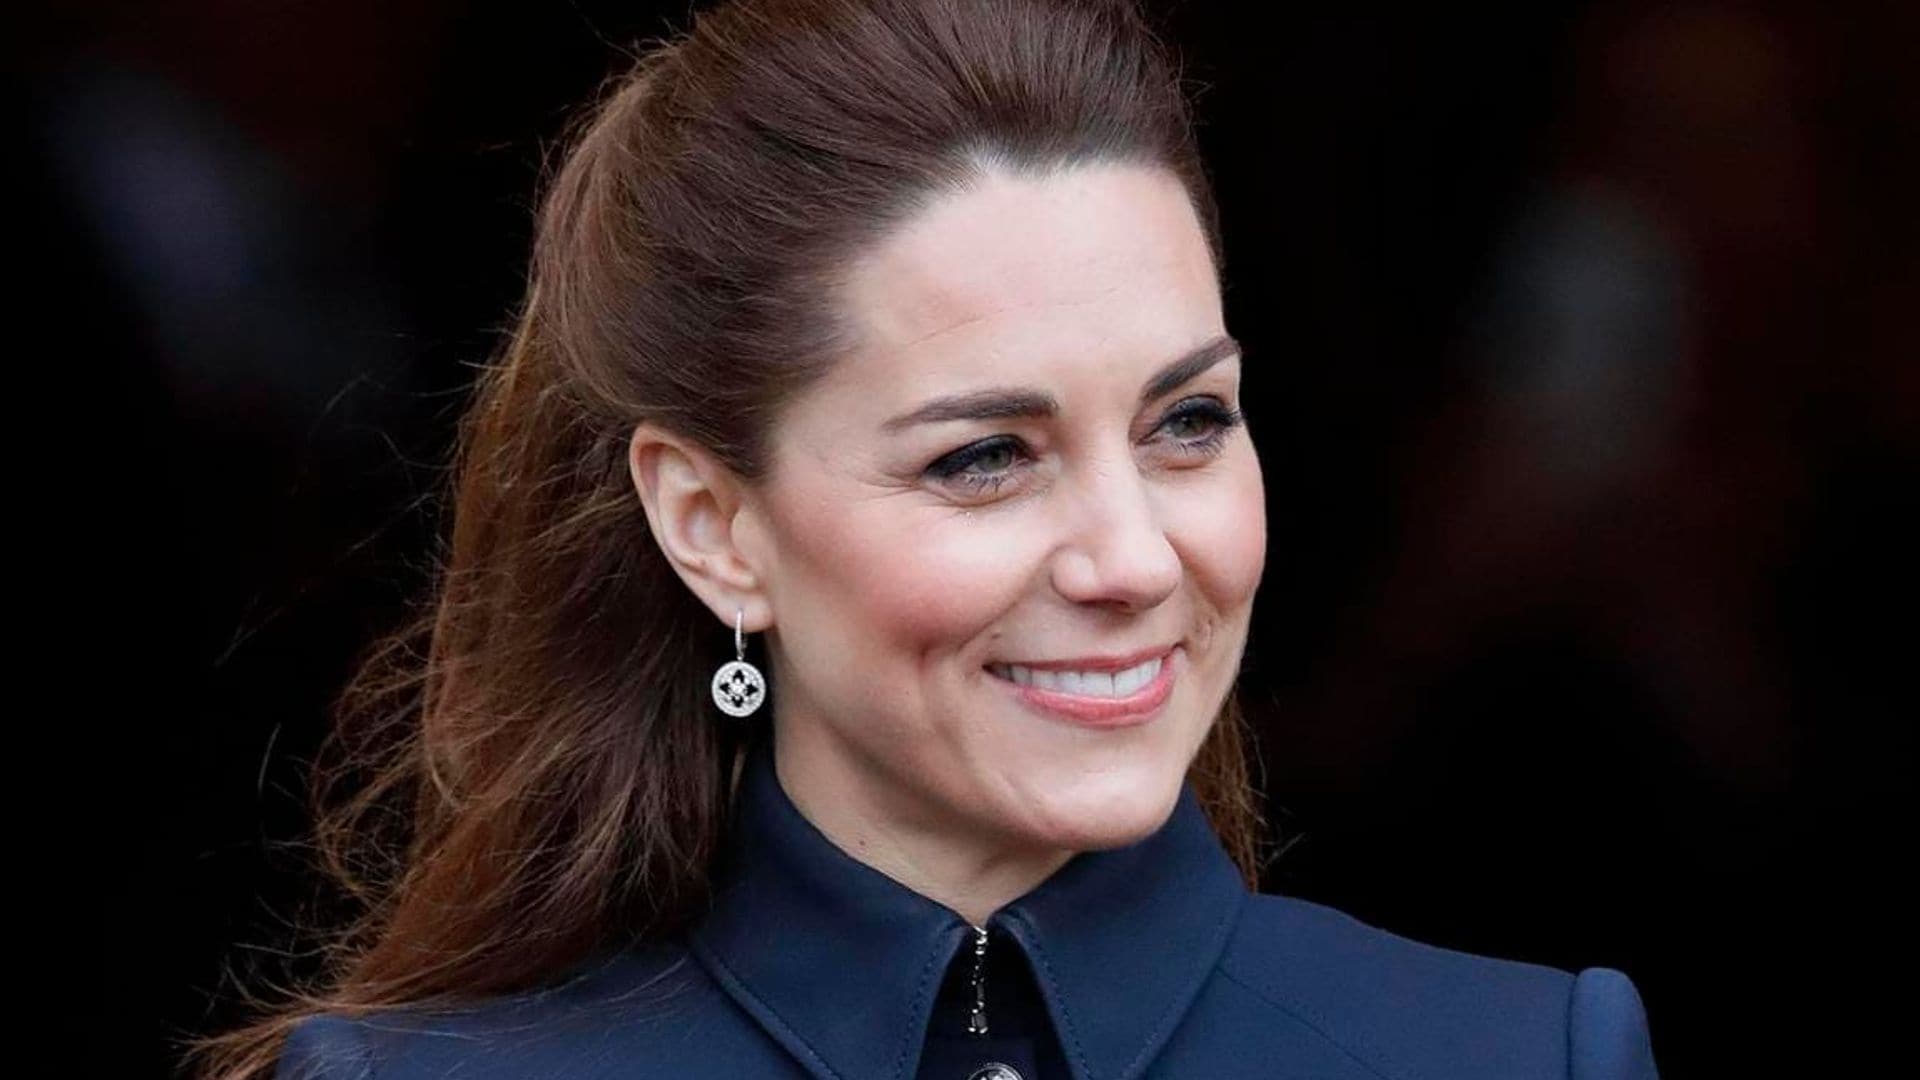 The secret tribute behind Kate Middleton’s latest look